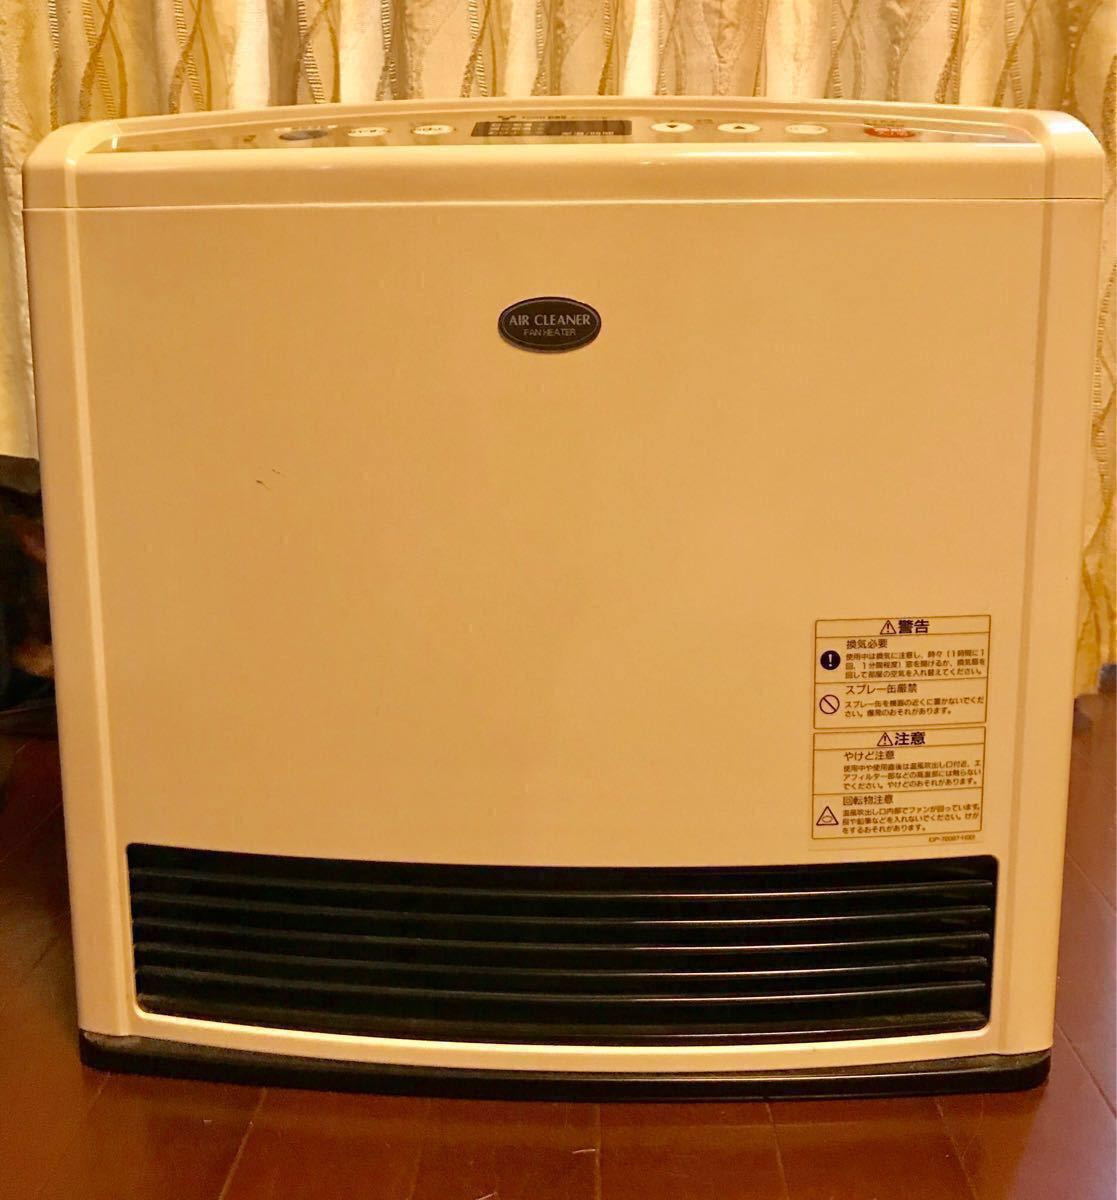 Secondhand Goods 0 Rinnai Gas Fan Heater Rc E4002ac City pertaining to measurements 1117 X 1200